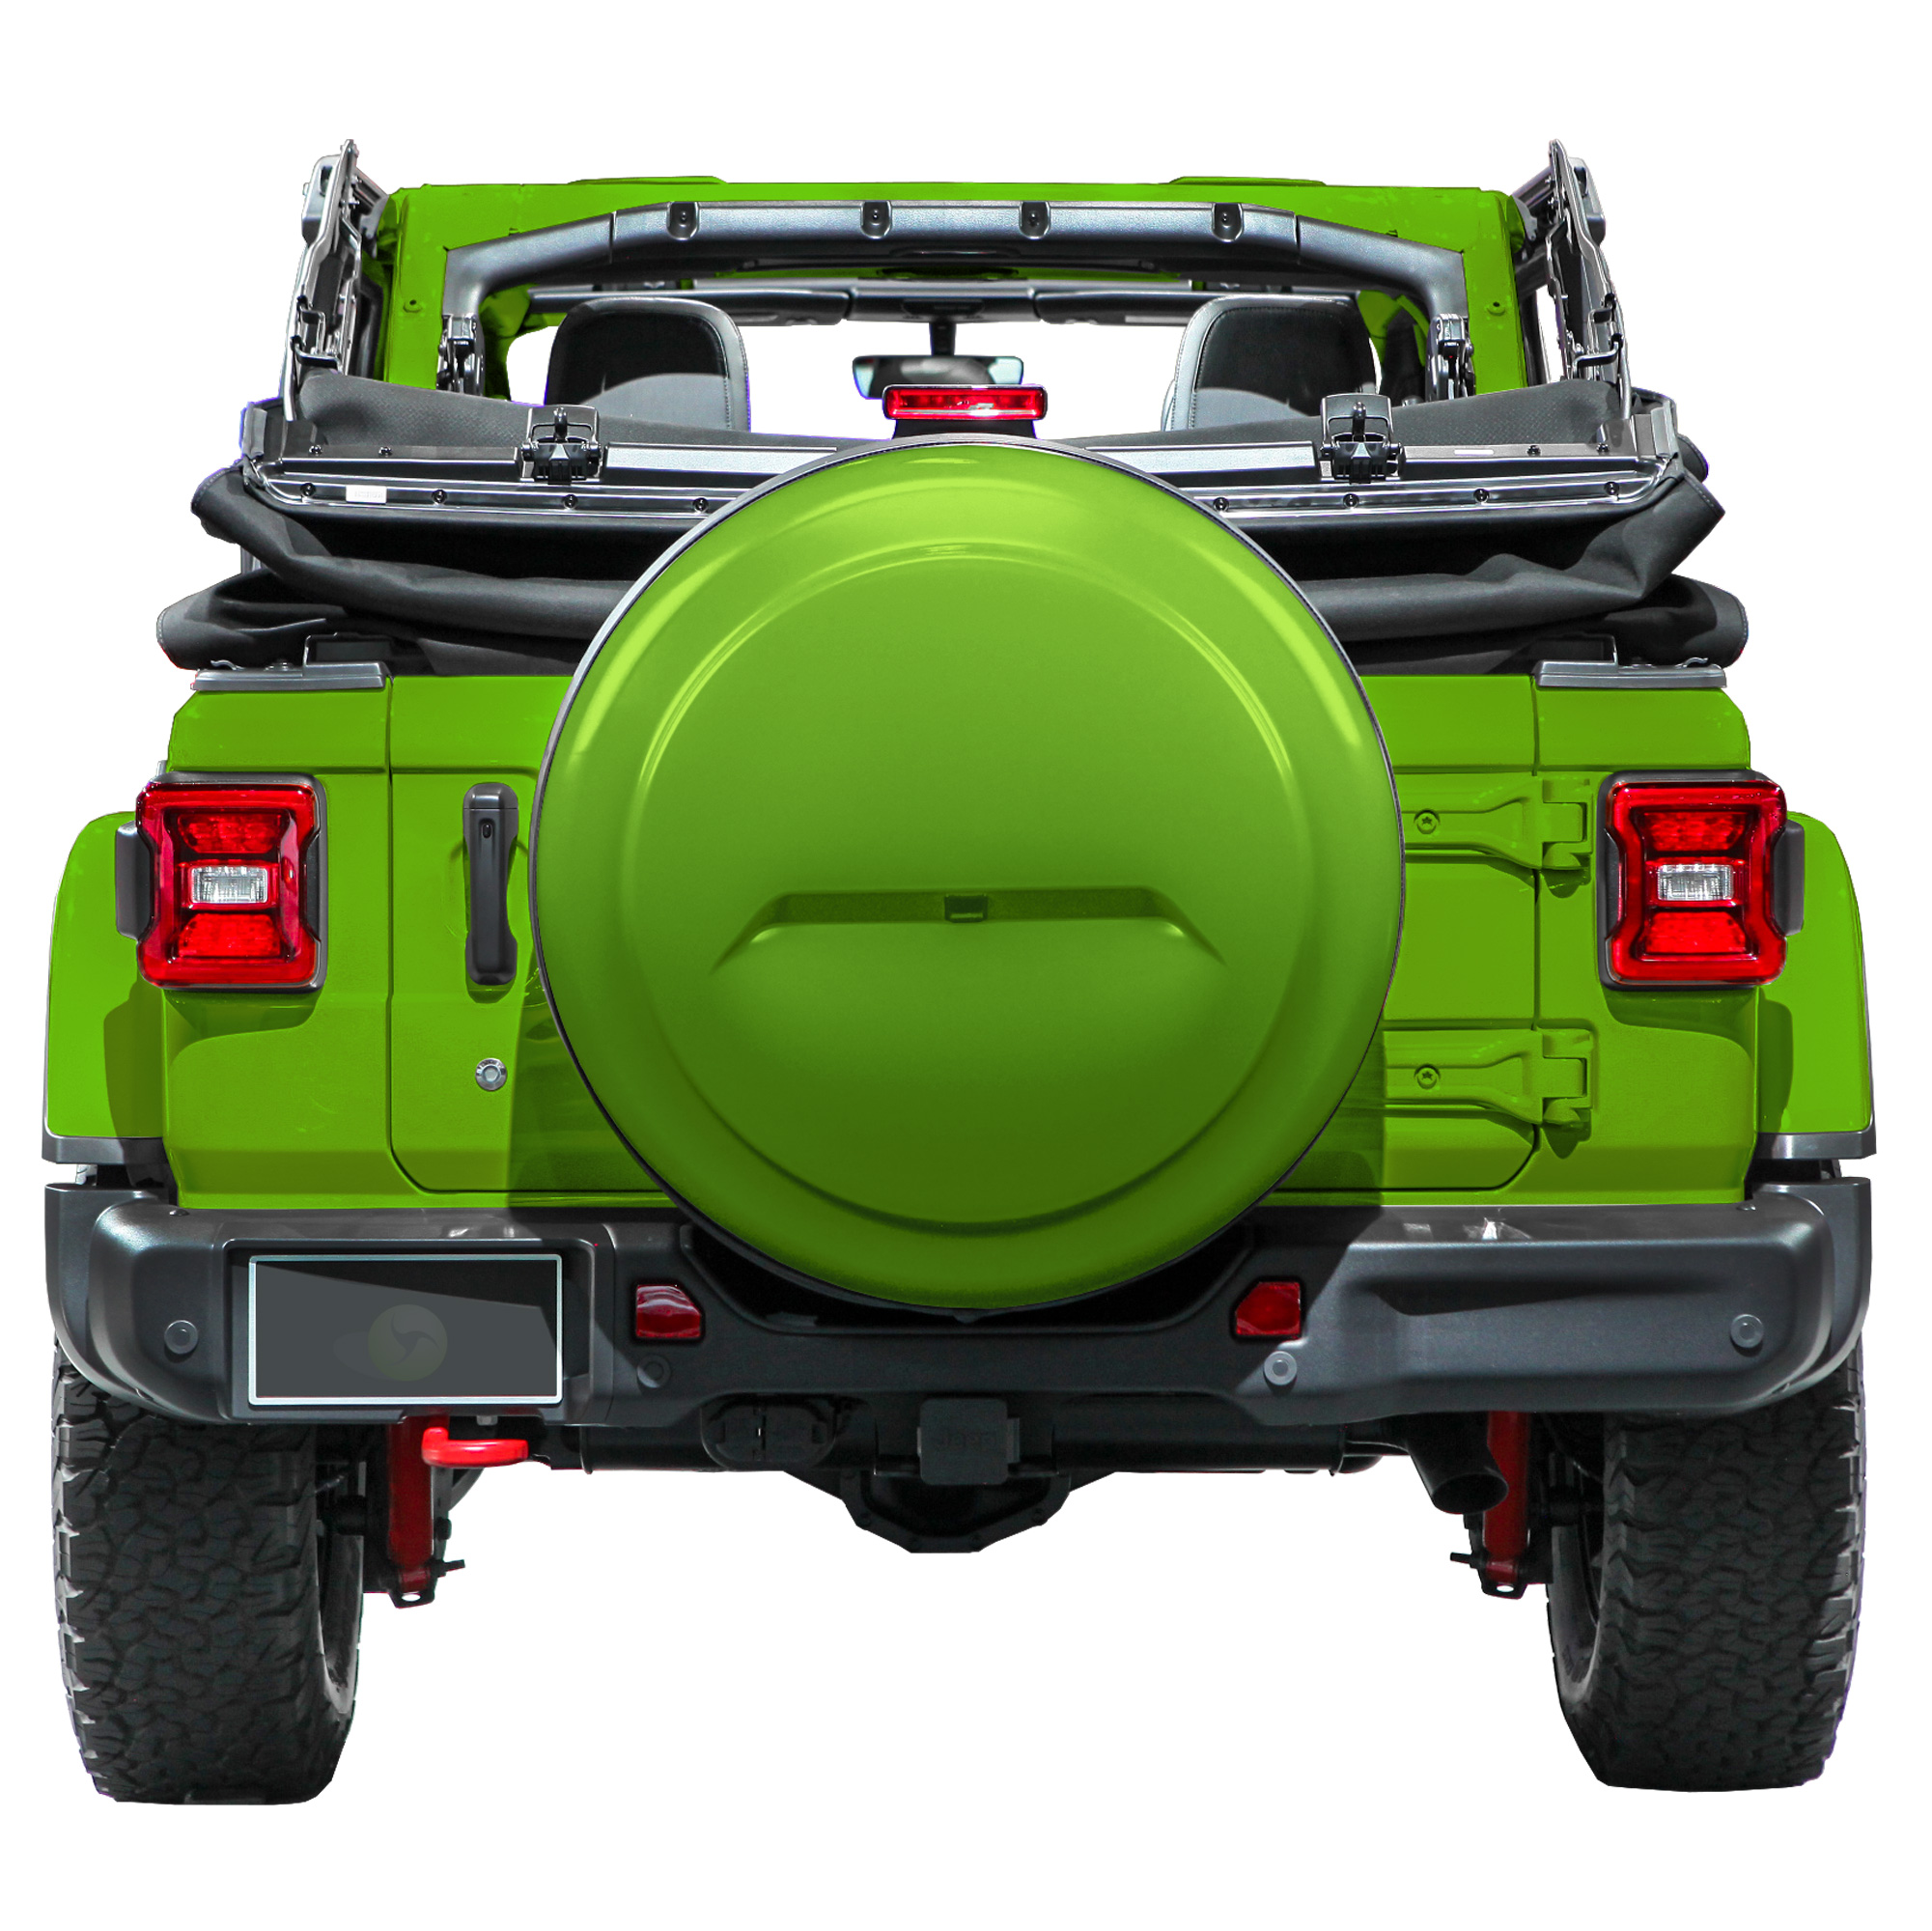 Boomerang Launches Tire Cover Line Designed for New Jeep Wrangler JL Backup  Camera System